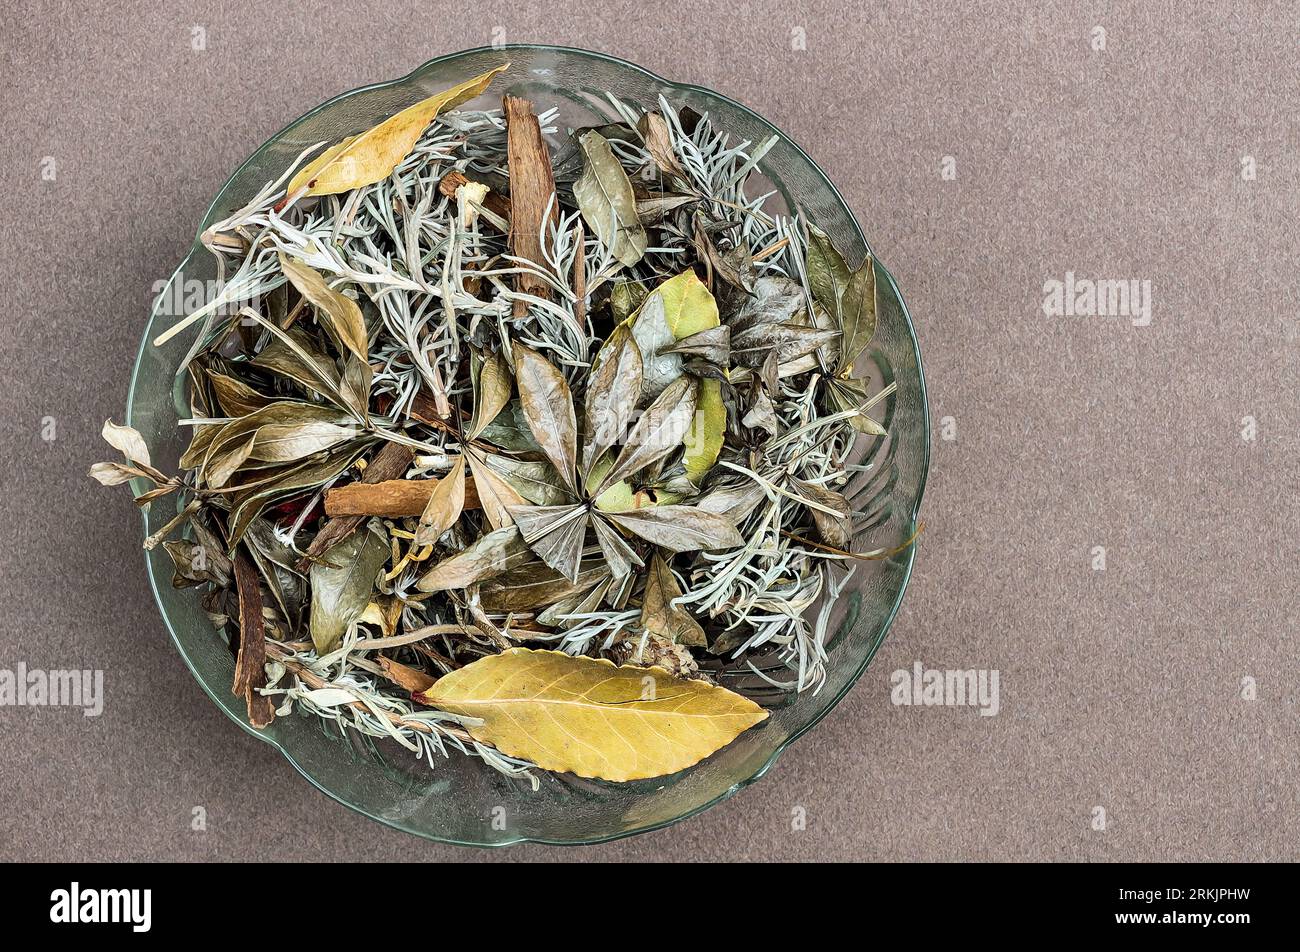 Dried leaves for use in potpourri